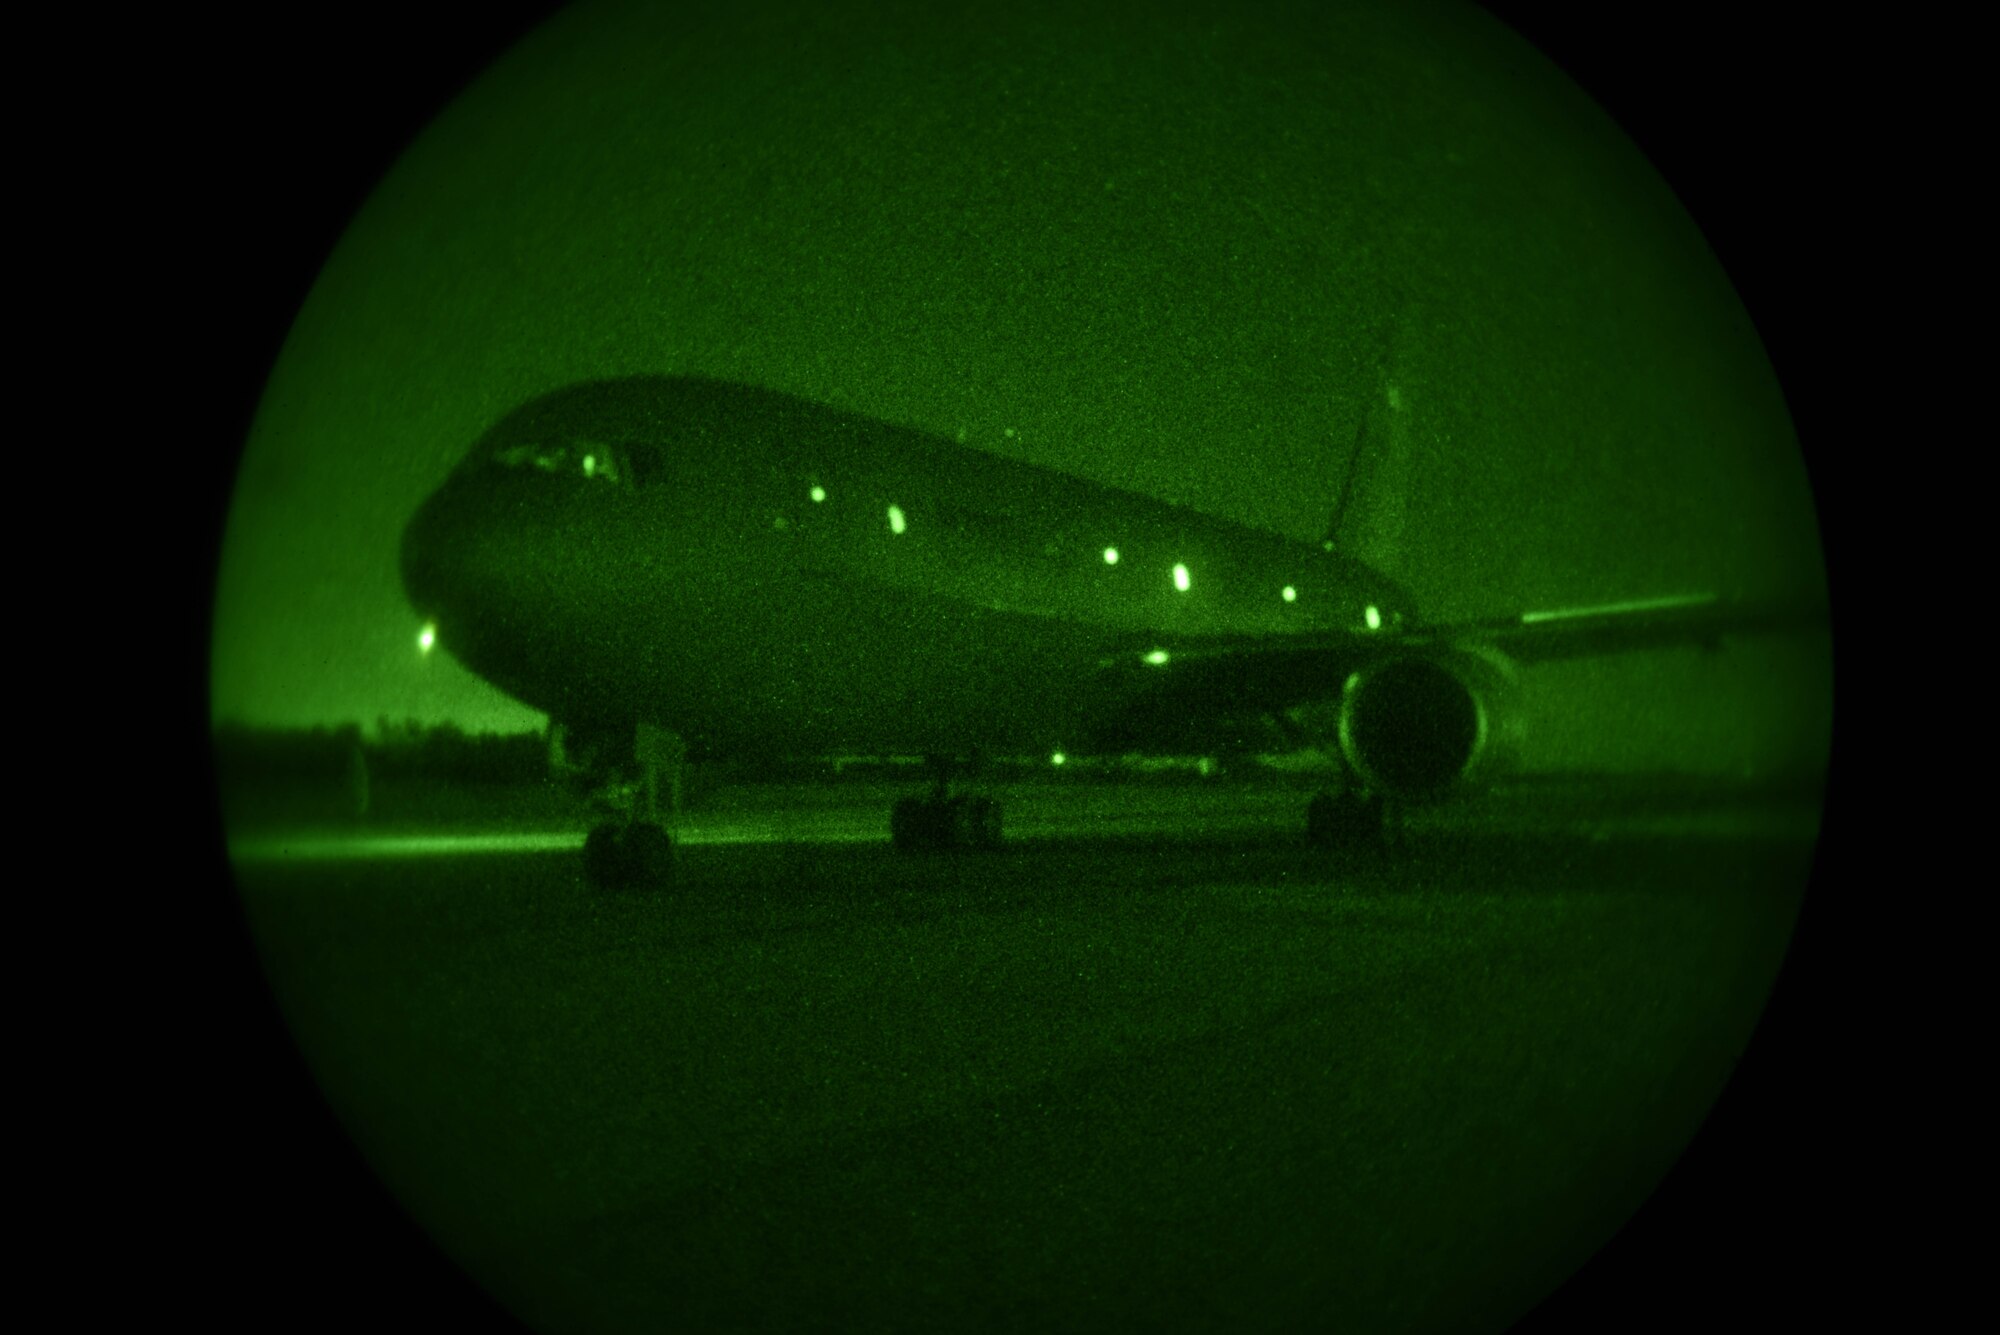 A KC-46A Pegasus parks after performing multiple flight maneuvers April 30, 2020, at North Auxiliary Airfield, South Carolina. The airfield is designed to test airframes and train aircrew in low-light environments. The testing data will be used to advance research in aerial refueling and night flying operations using night vision goggles. (U.S. Air Force photo by Airman 1st Class Marc A. Garcia)